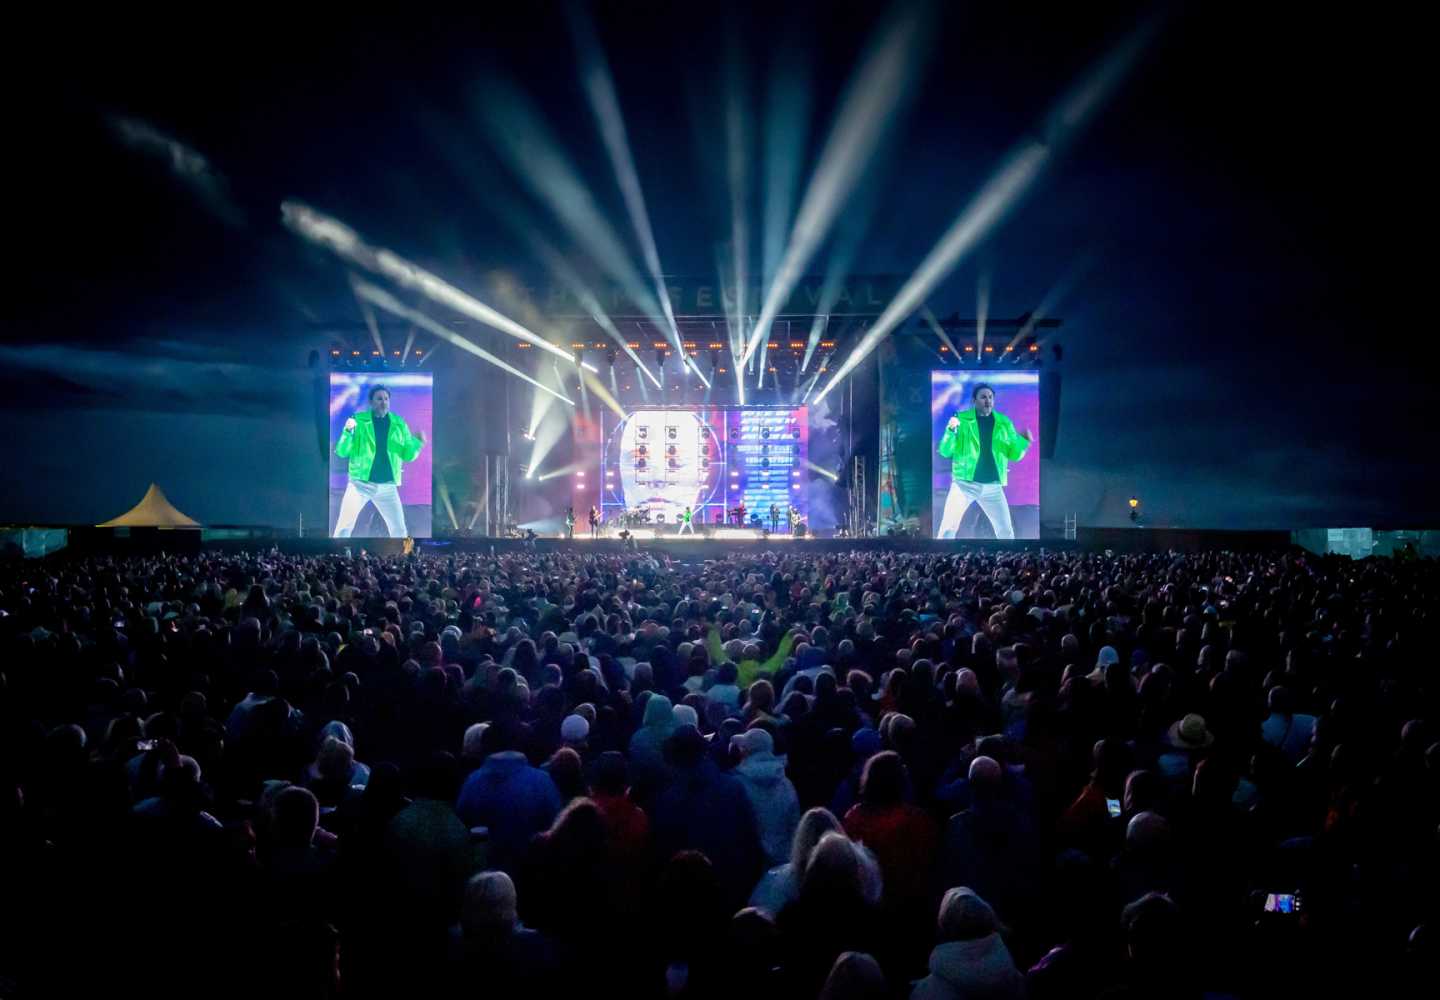 Duran Duran headlined a number of UK outdoor shows this summer (photo: Lytham Festival)